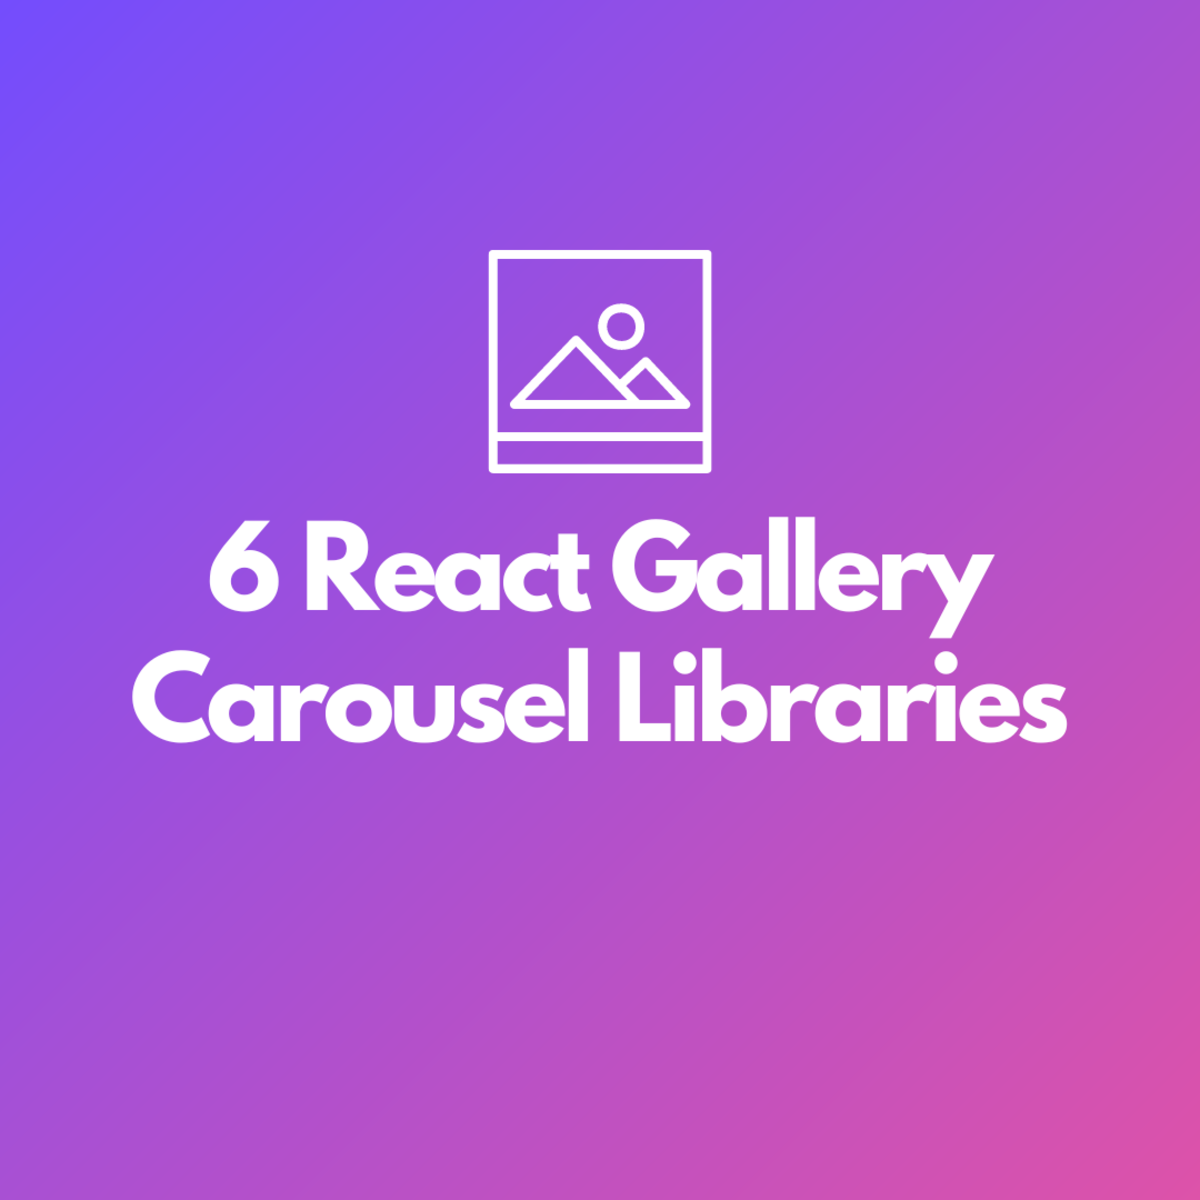 6 React Gallery Carousel Libraries to Check Out: The Ultimate List